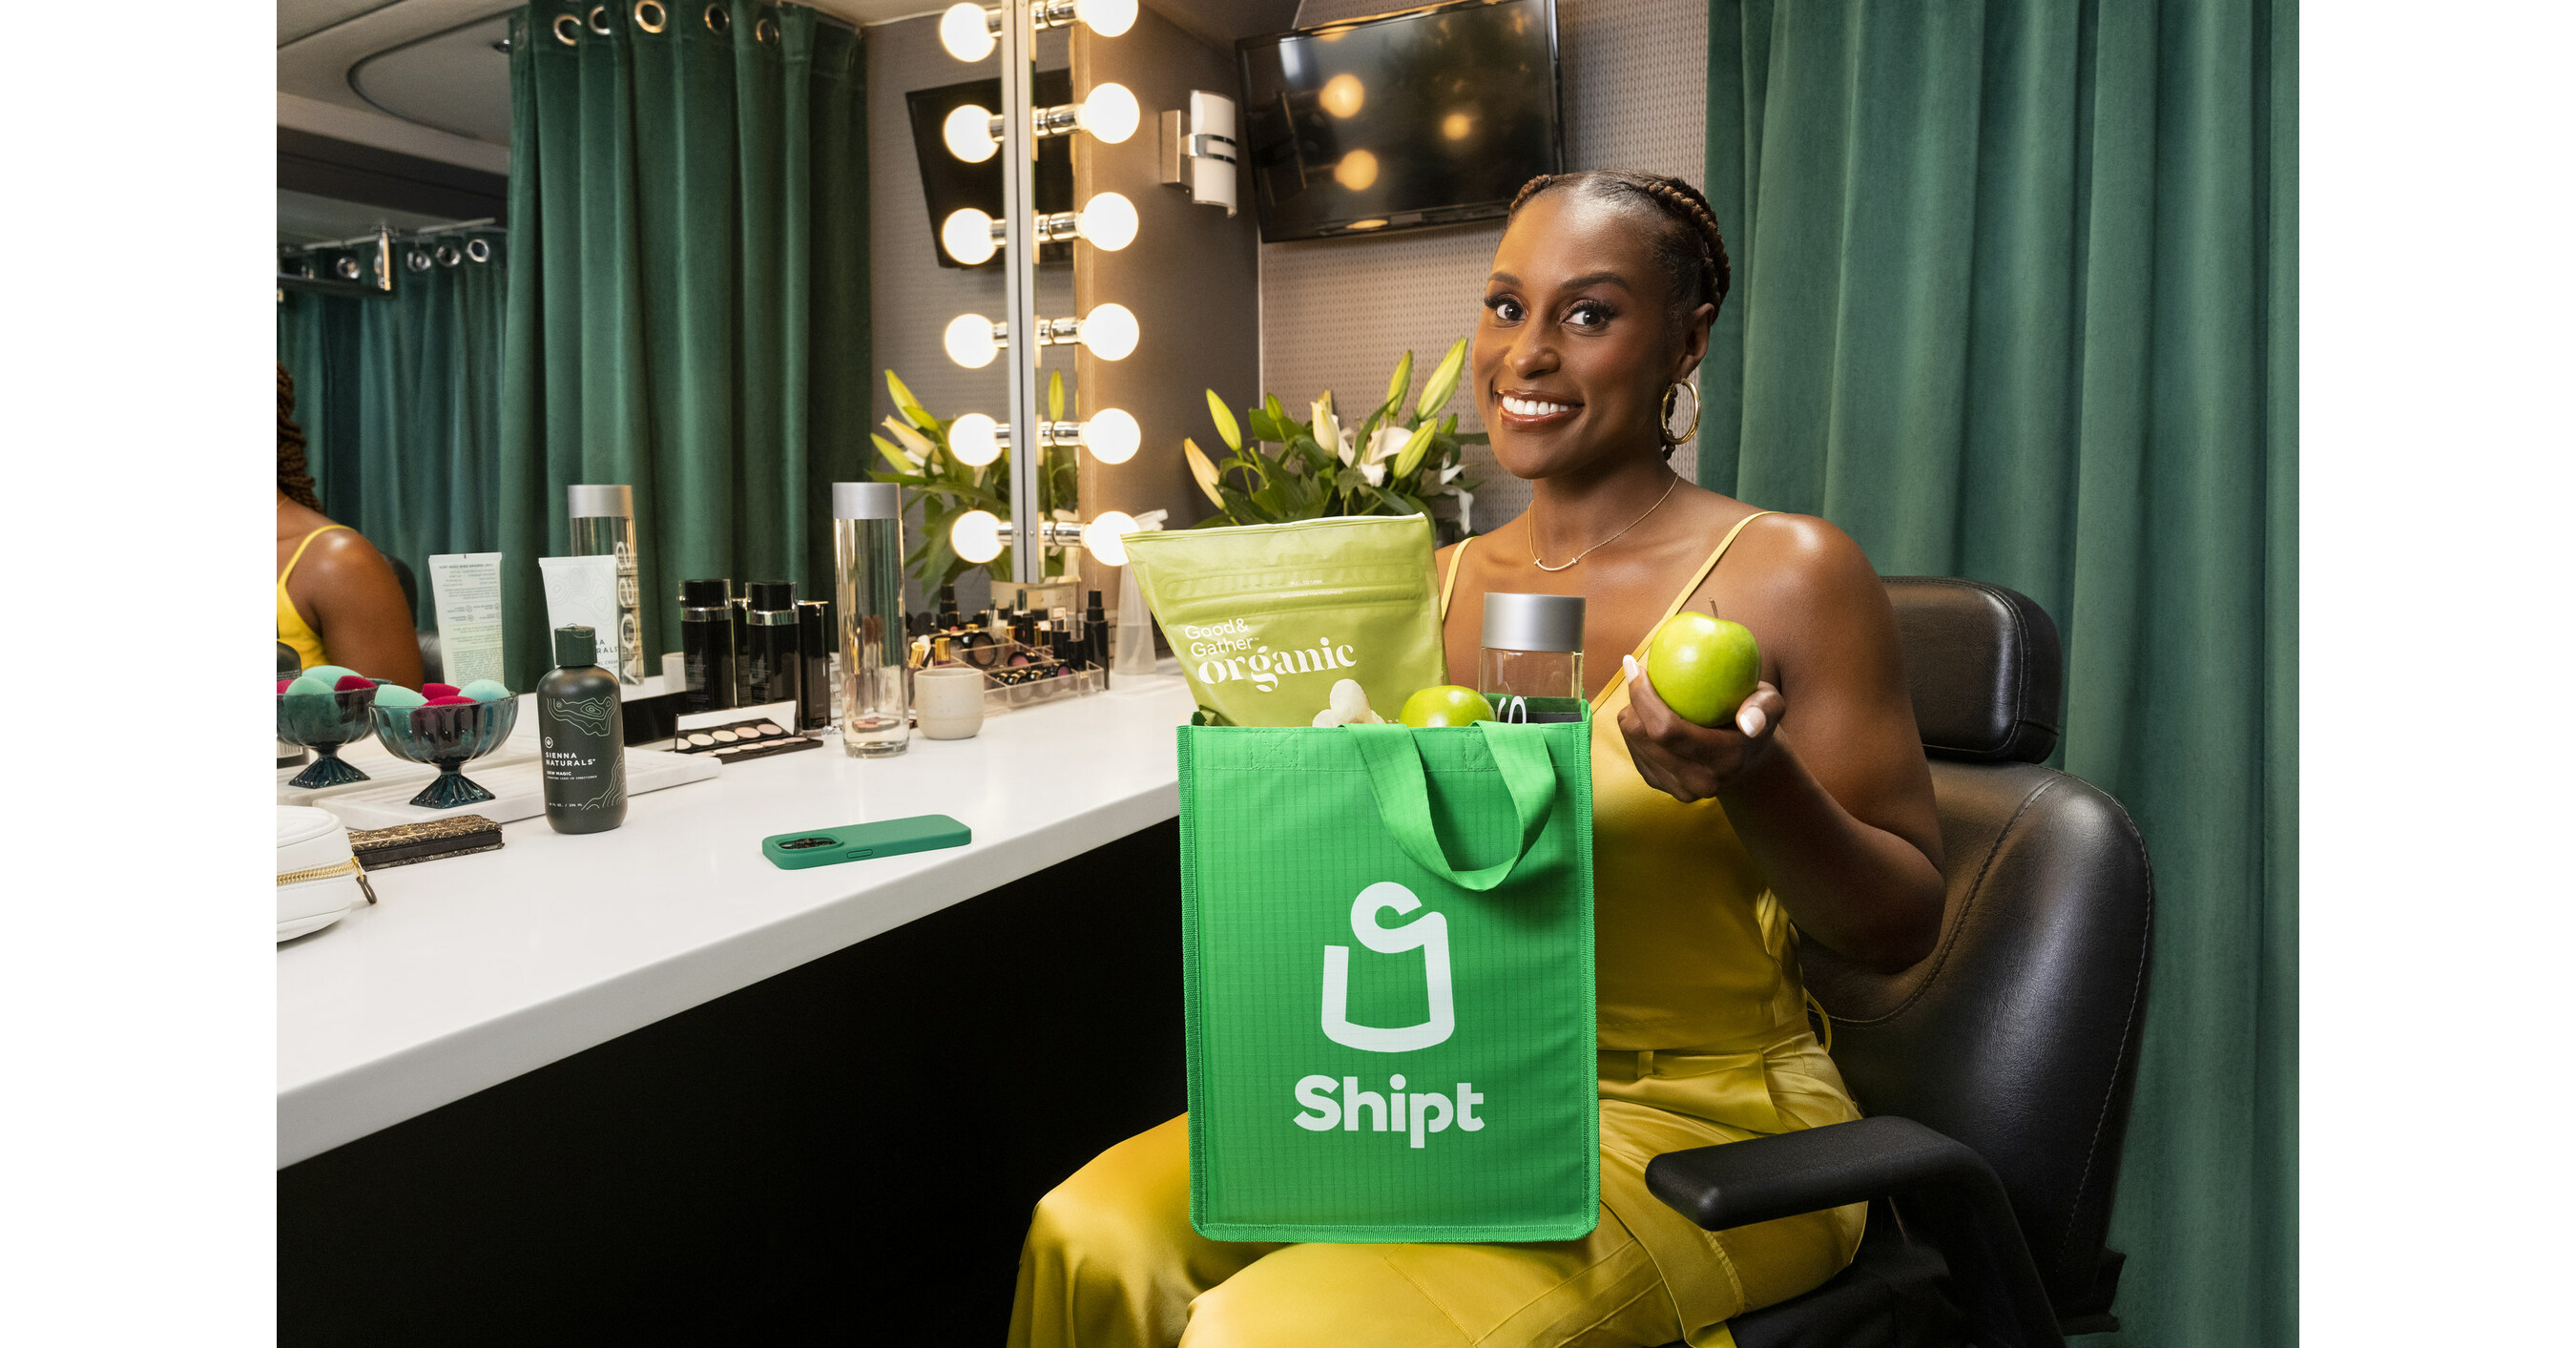 Actress Issa Rae shares her 9 everyday essentials